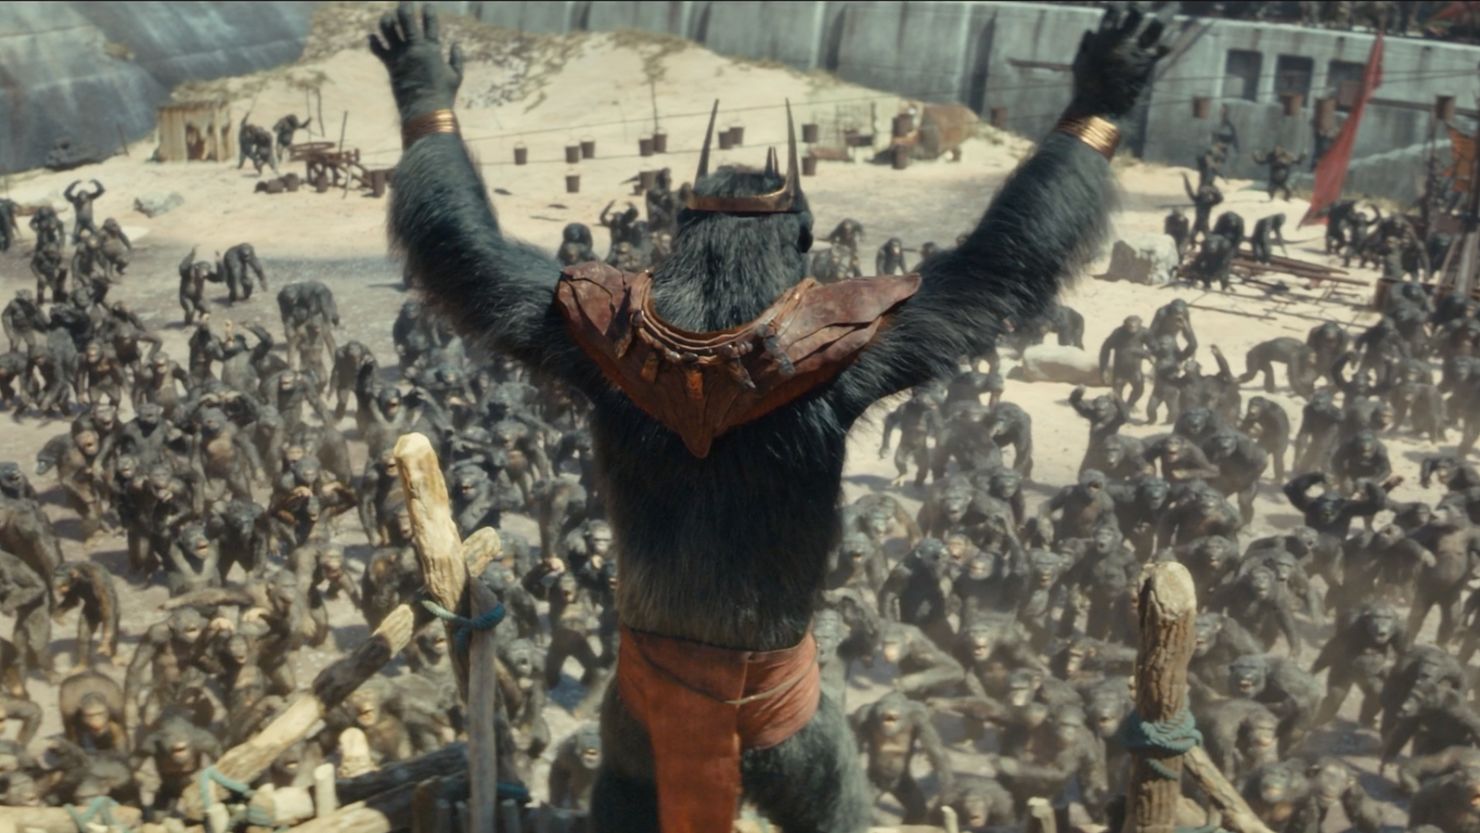 Kevin Durand as Proximus Caesar takes in the adulation in Kingdom of the Planet of the Apes